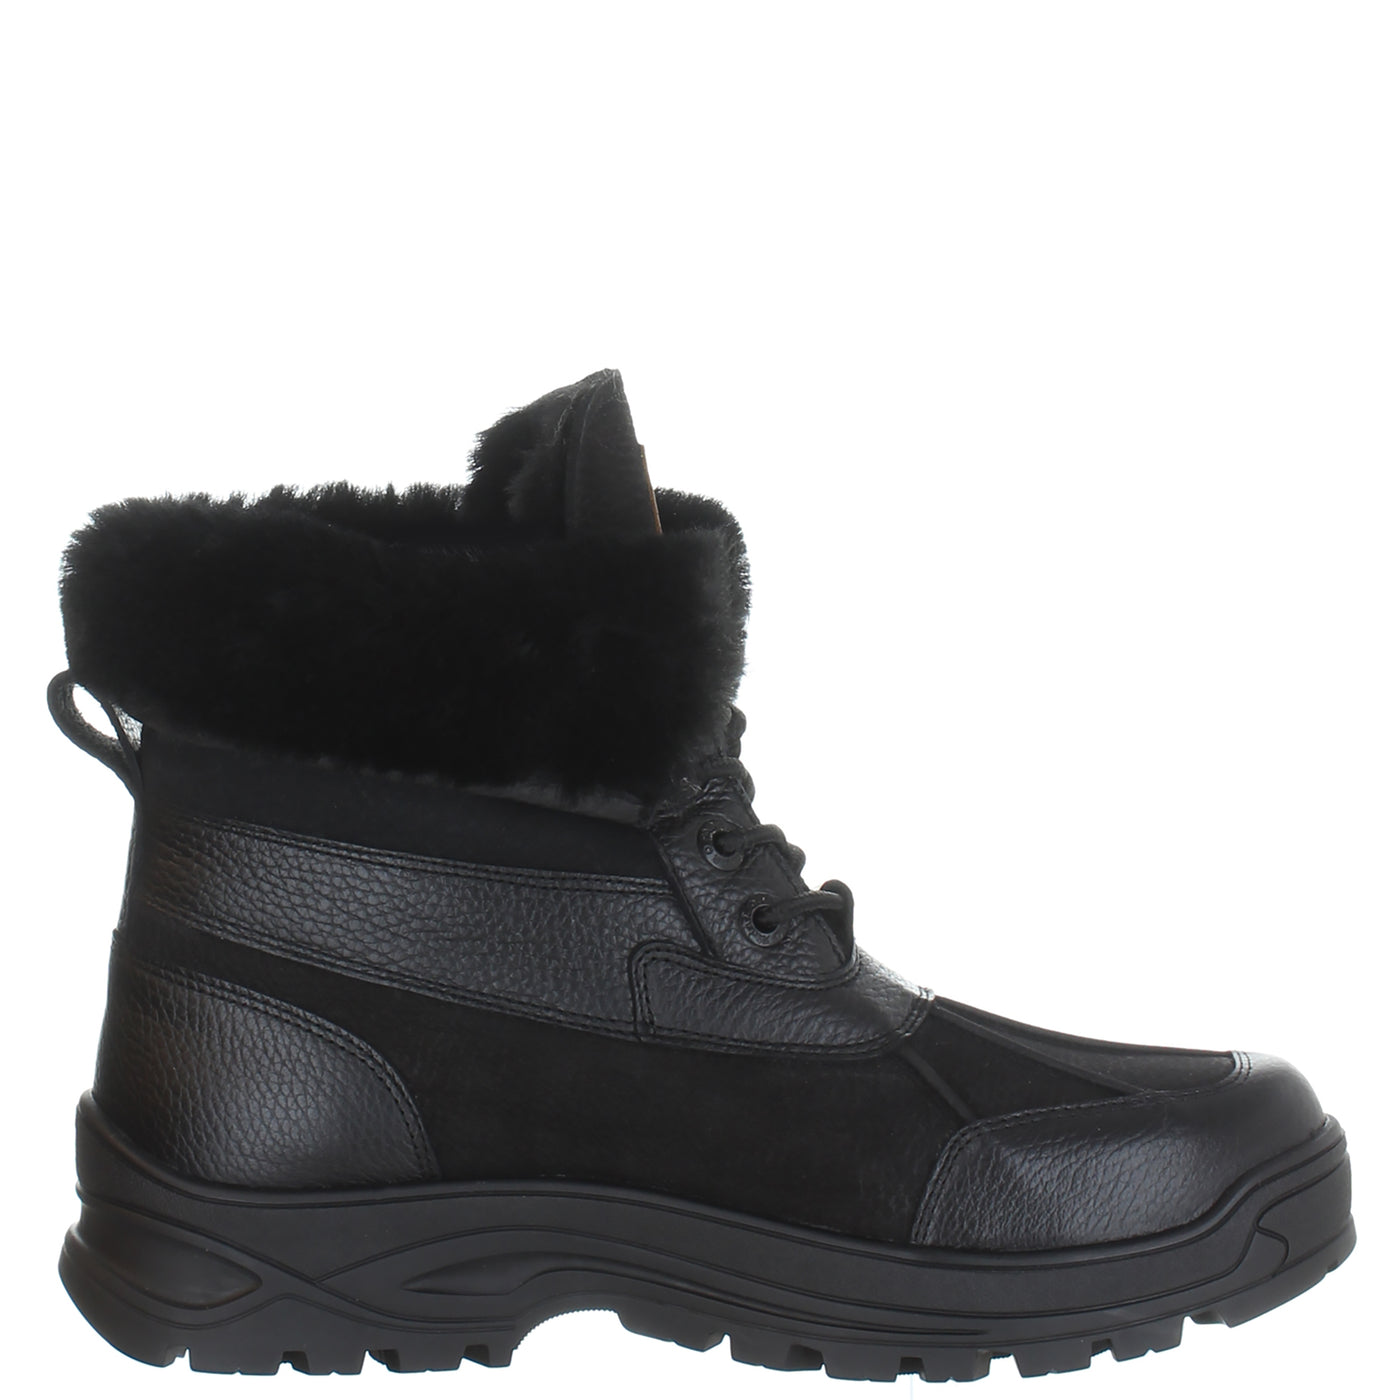 Mike Men's Heritage Boot w/ Ice Grippers